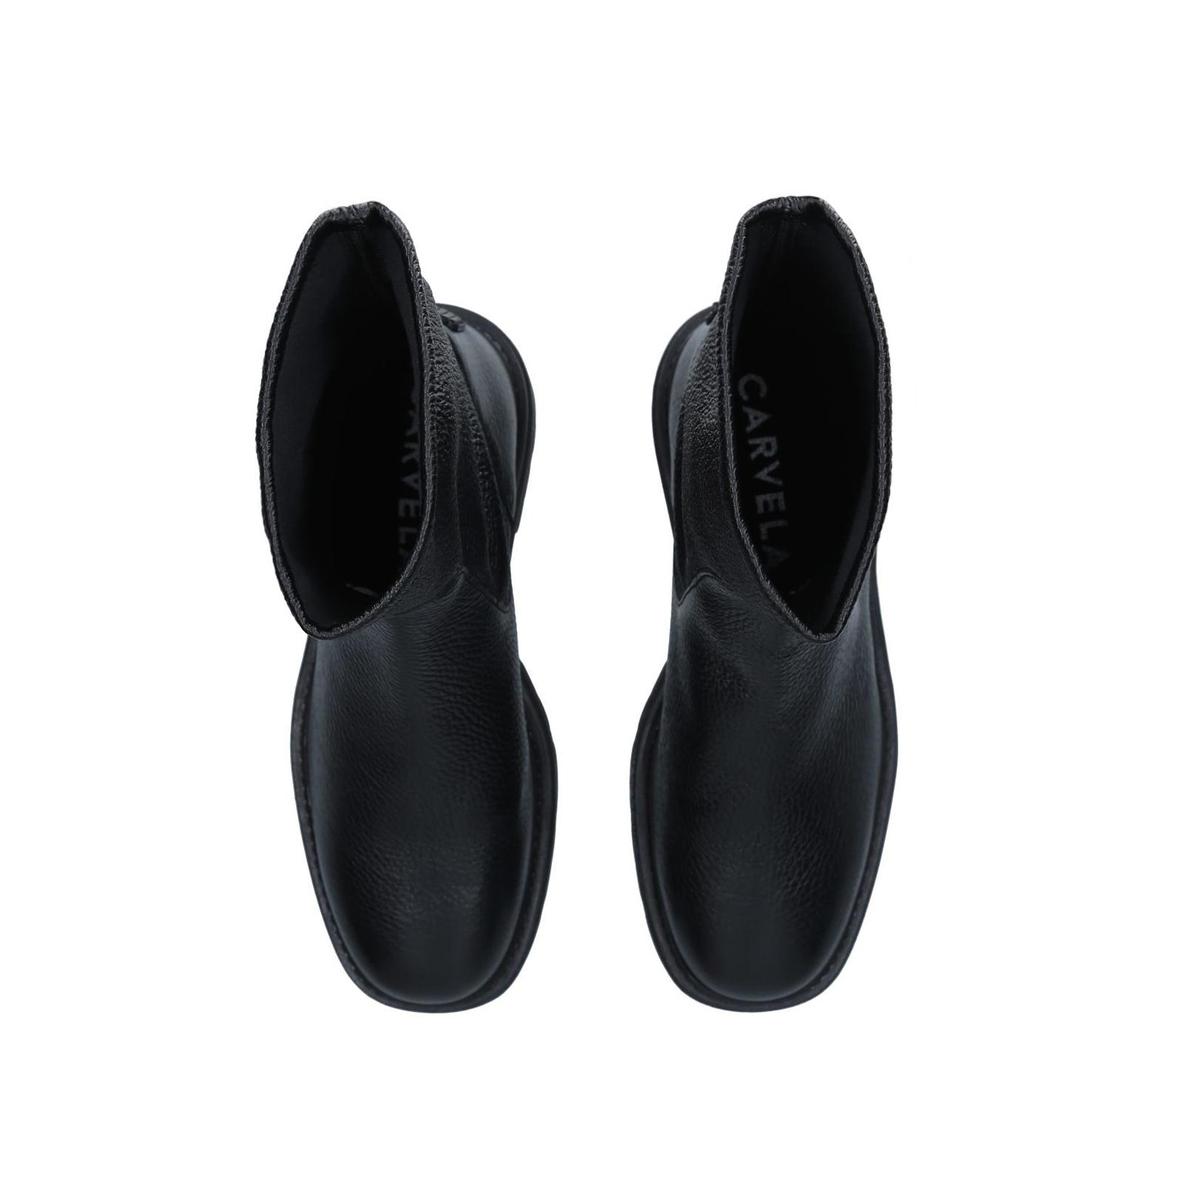 SINCERE ANKLE Black Leather Relaxed Ankle Boots by CARVELA